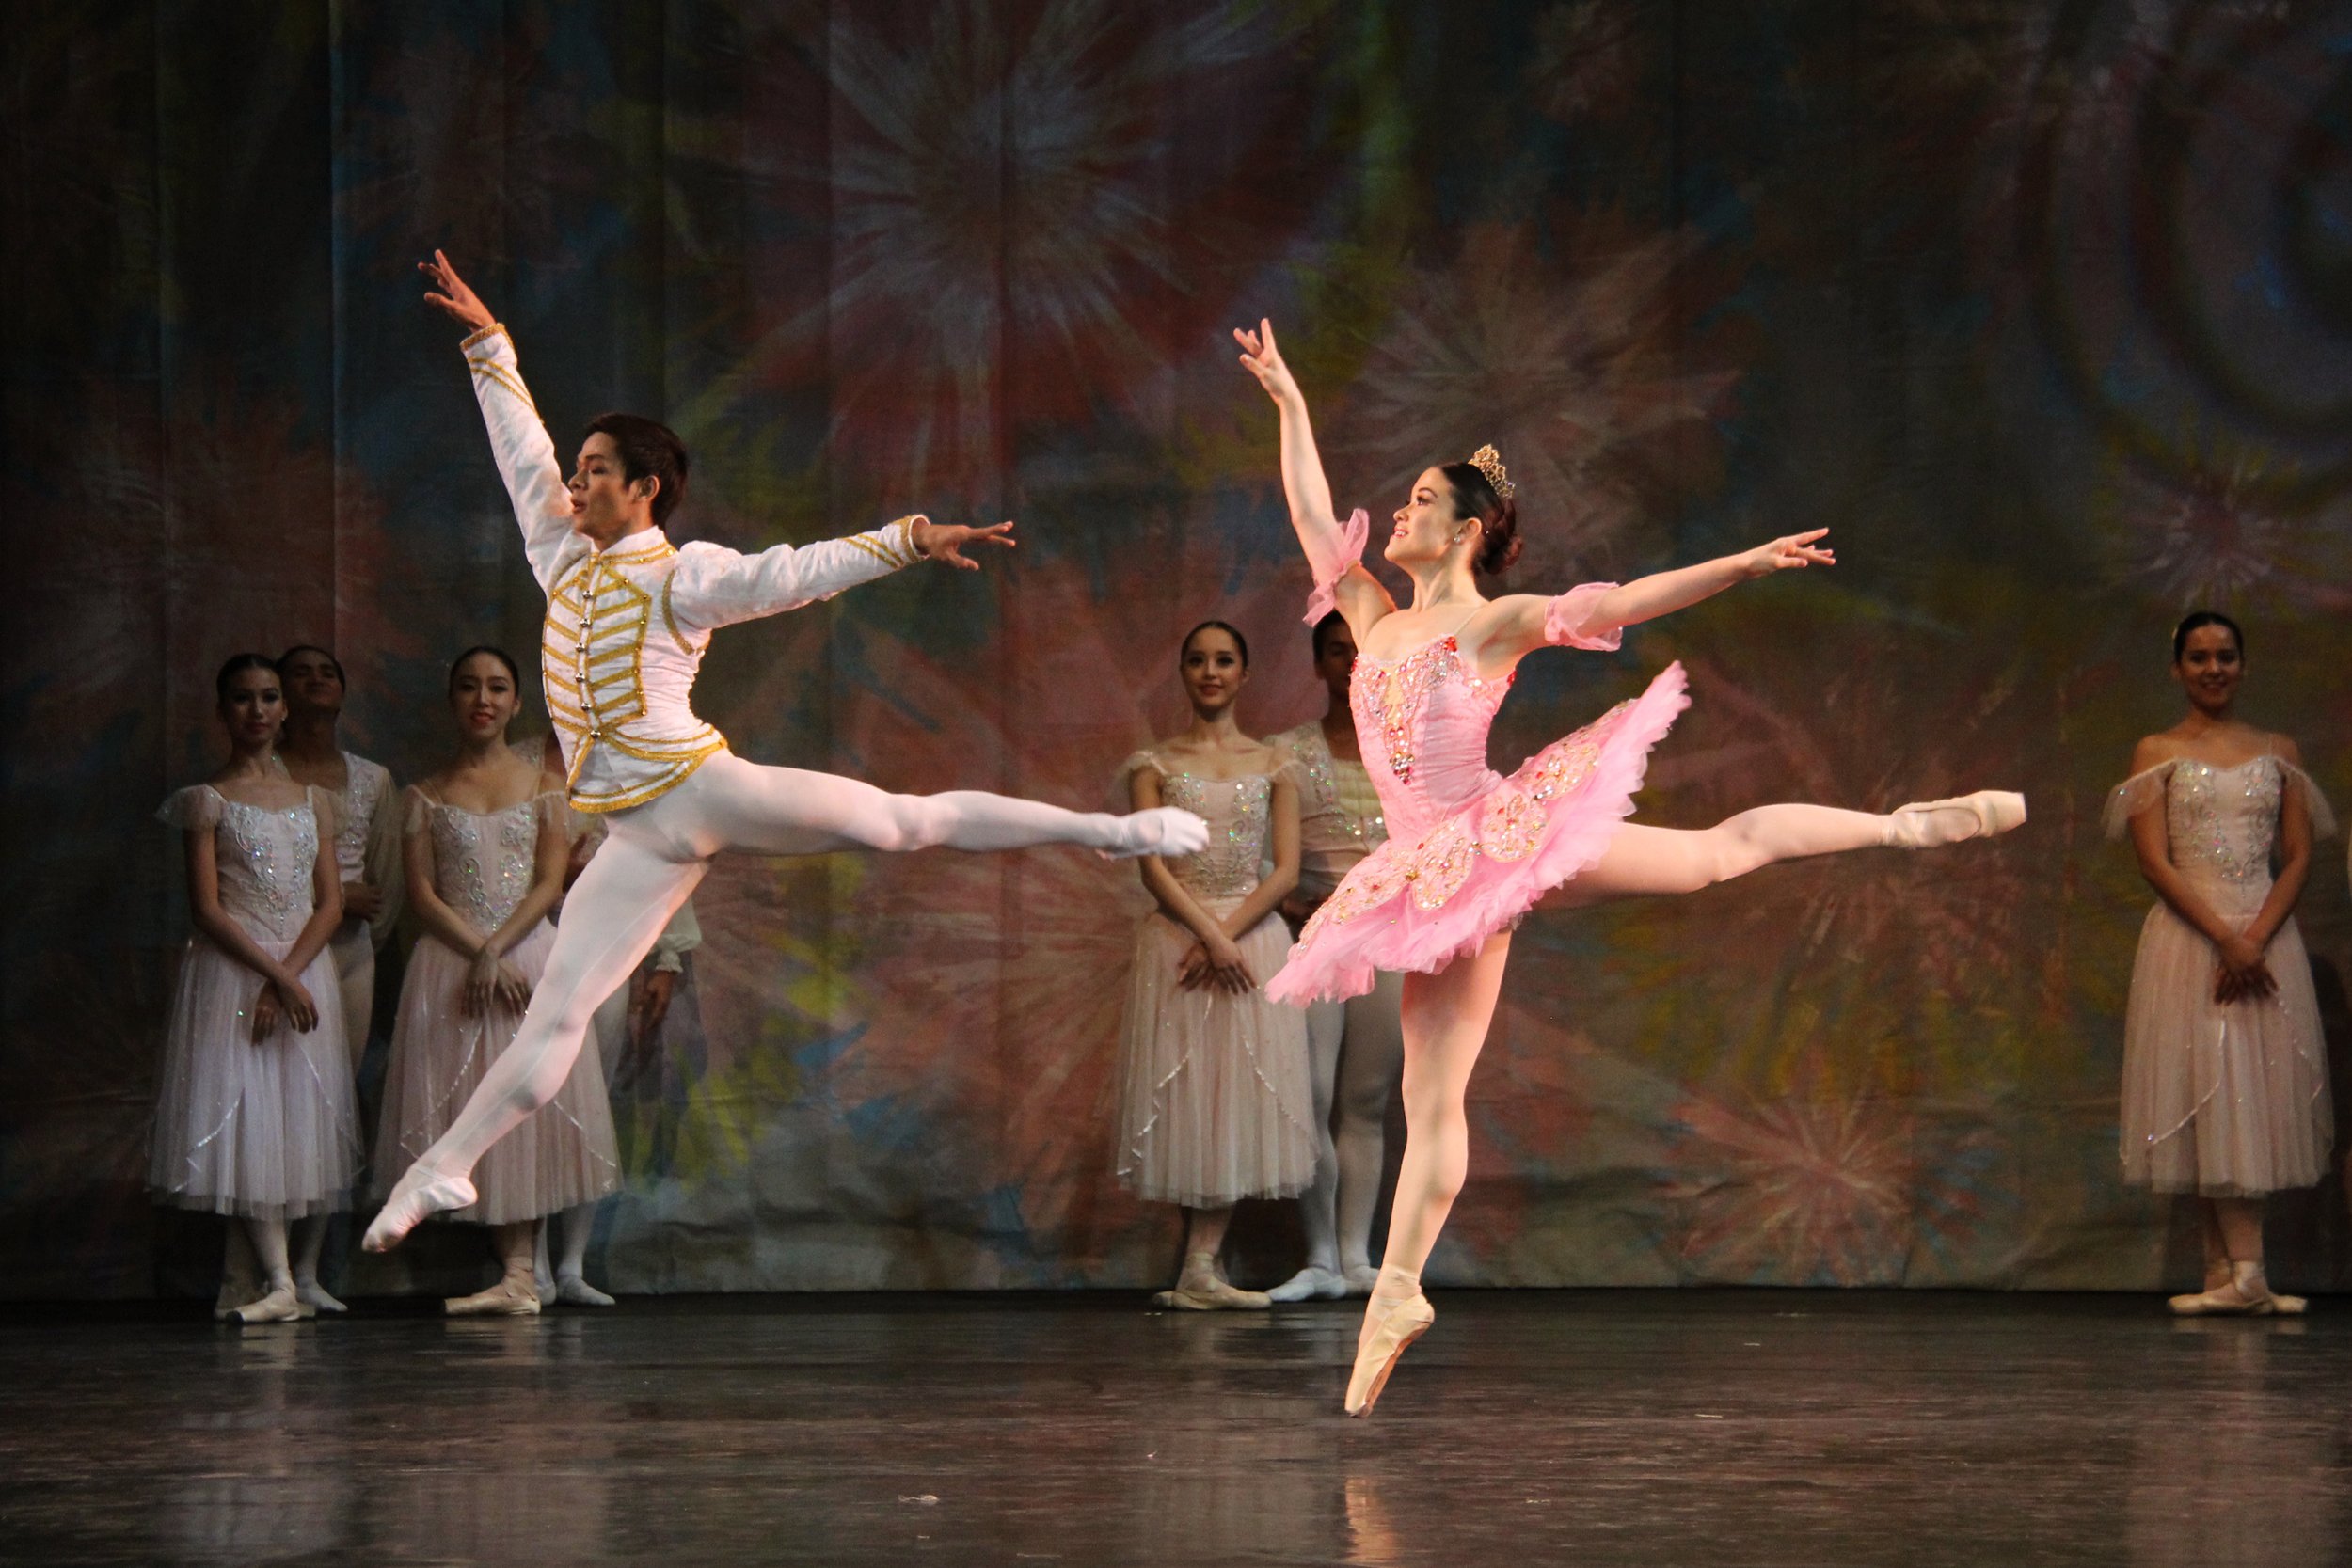    The Sugar Plum Fairy (Tiffany Chiang-Janolo) and her Prince (Gerardo Francisco Jr.) act as the hosts of Masha and the Nutcracker as the pair is magically transported to the Land of Sweets after having defeated the Mouse King. As a reward, they are